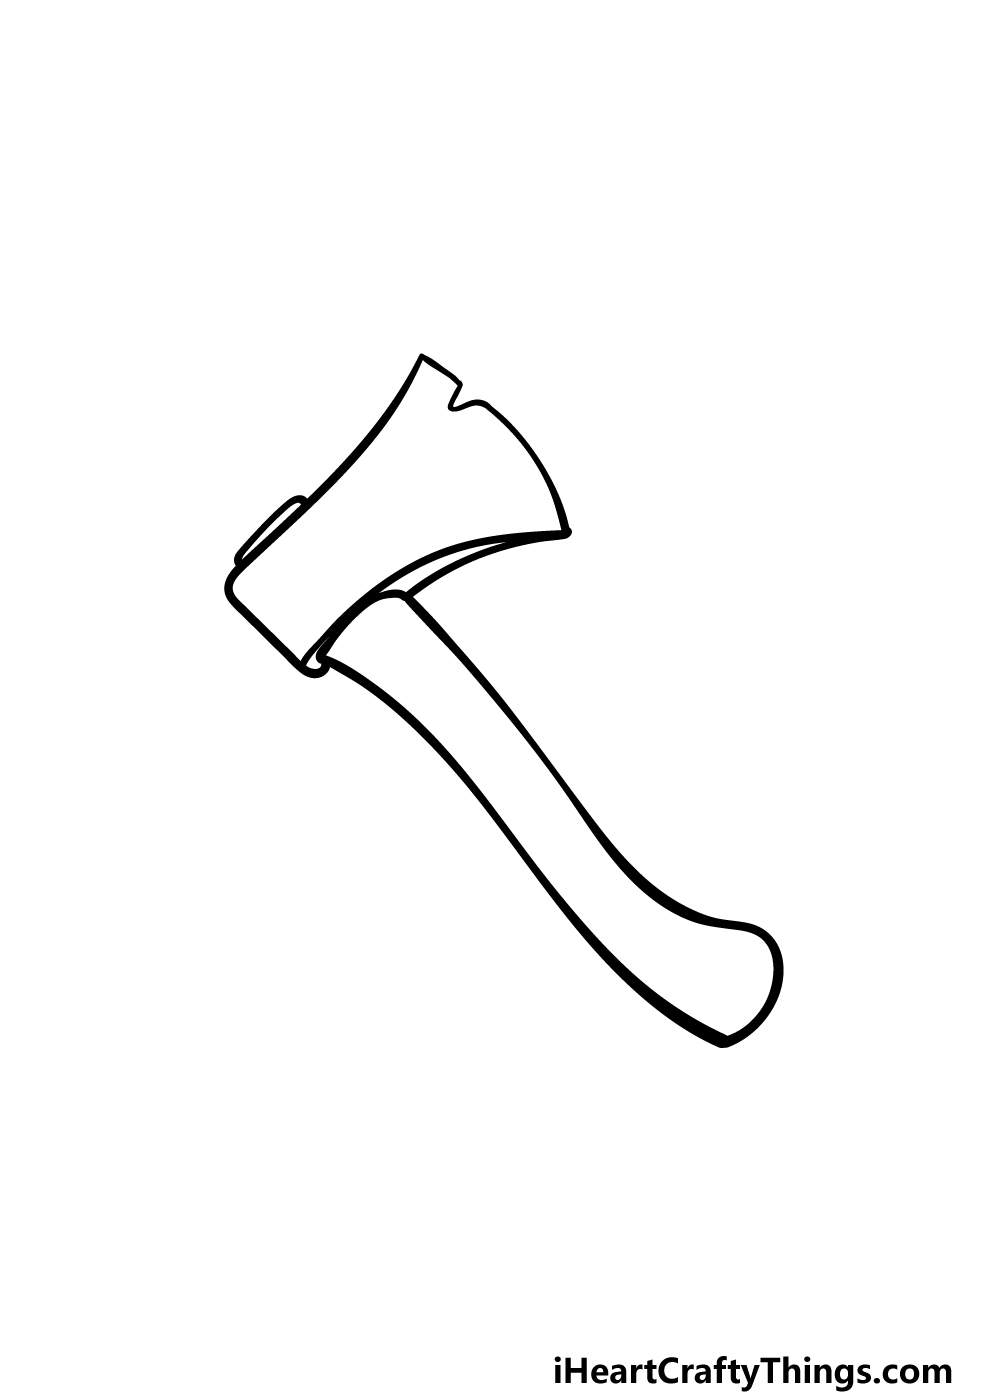 drawing an axe step 3